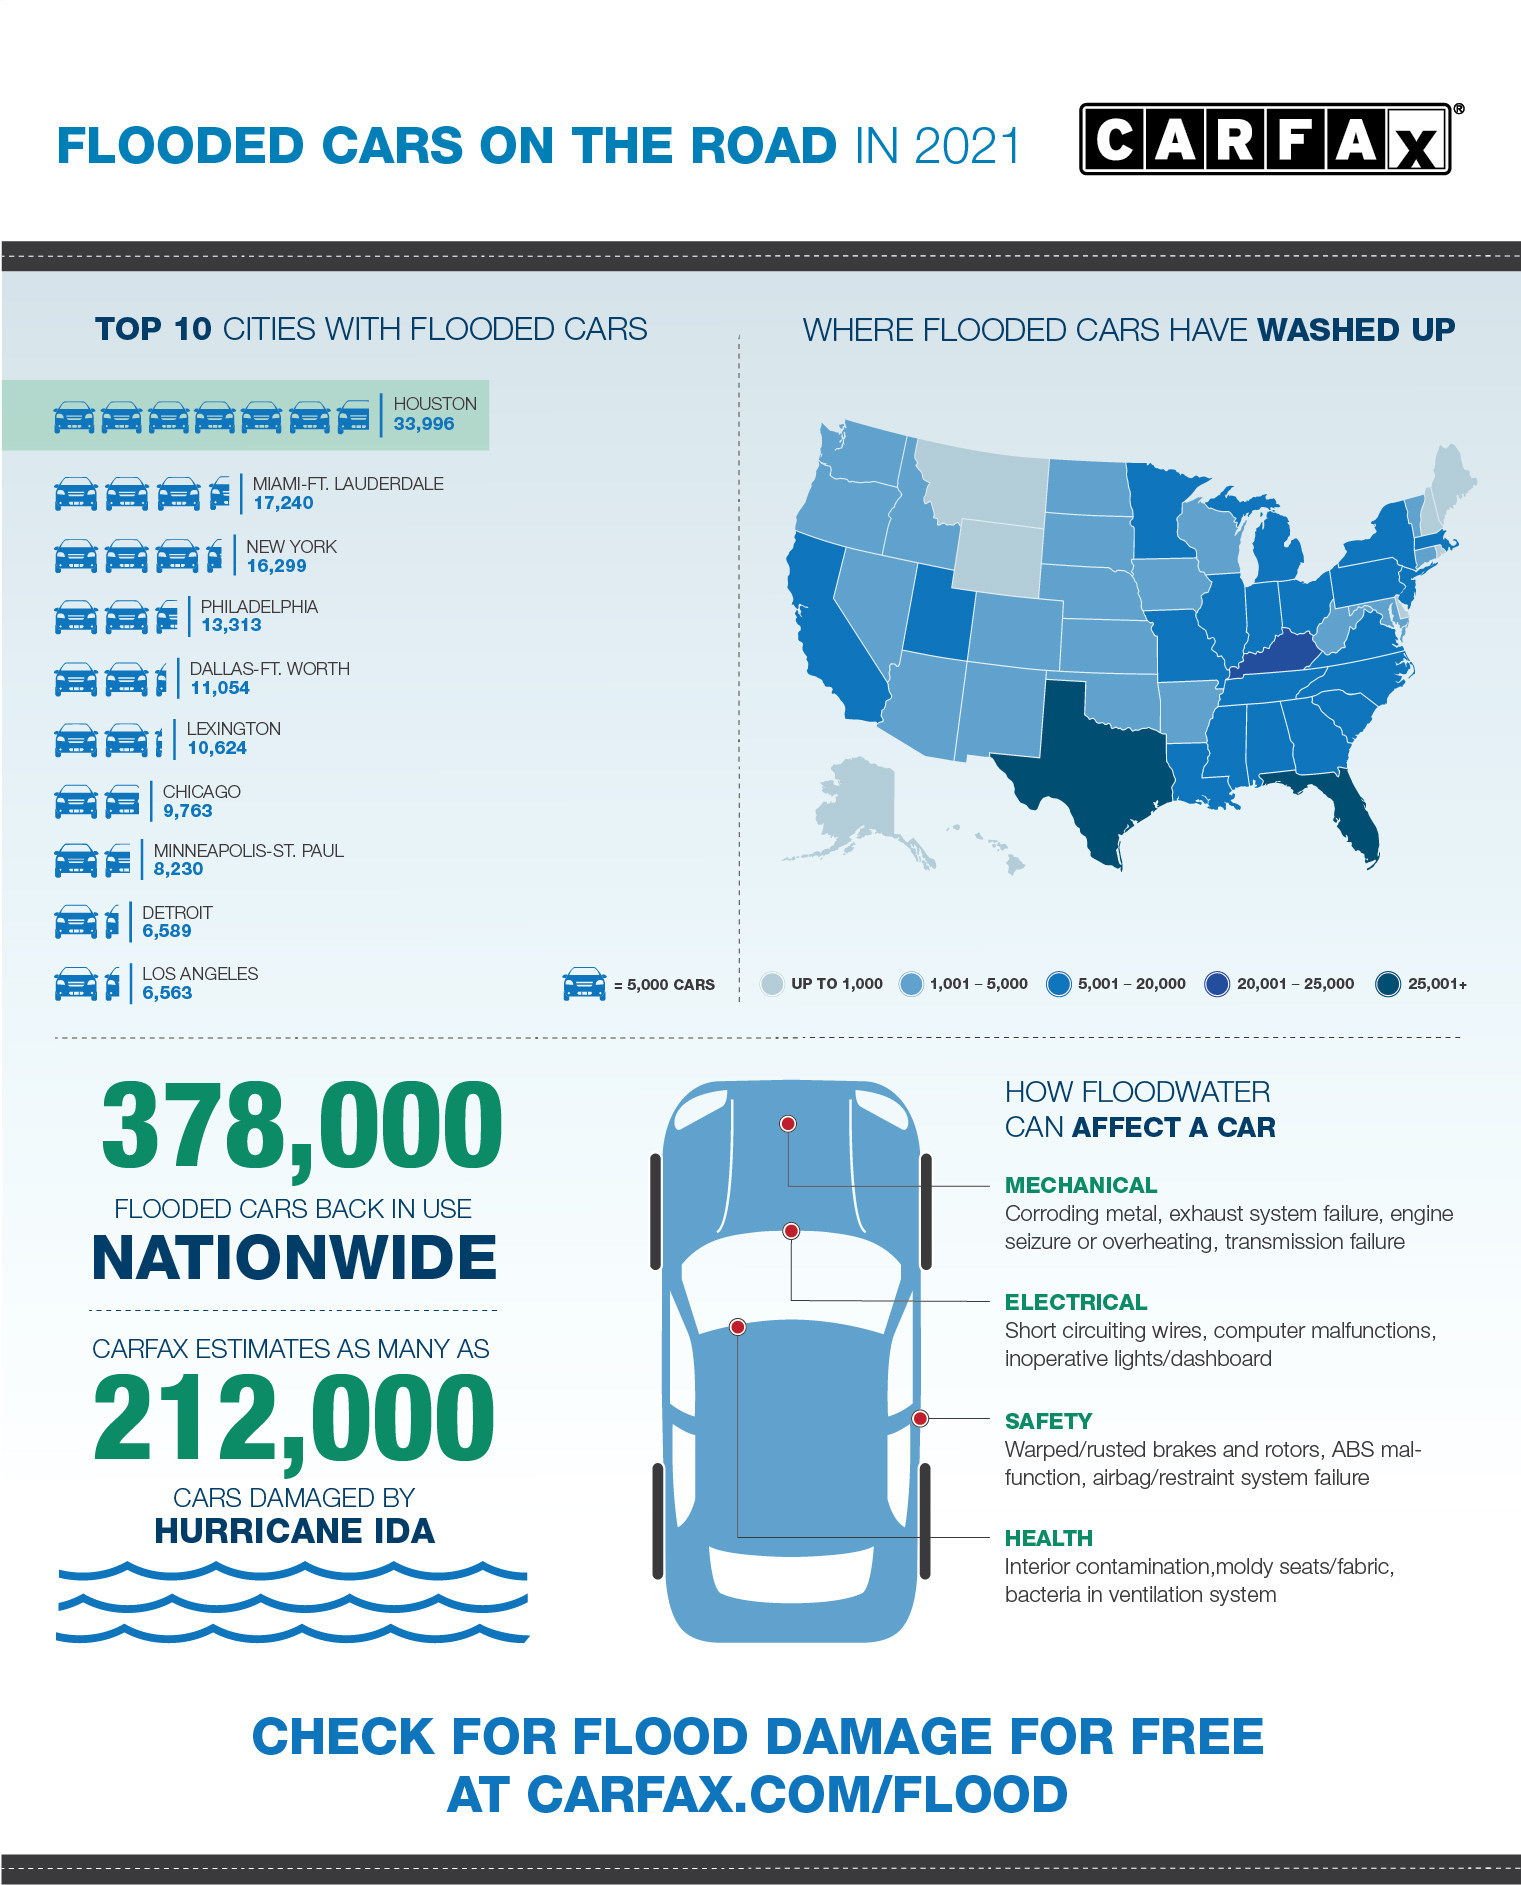 Report: 212,000 Vehicles Damaged by Hurricane Ida | THE SHOP